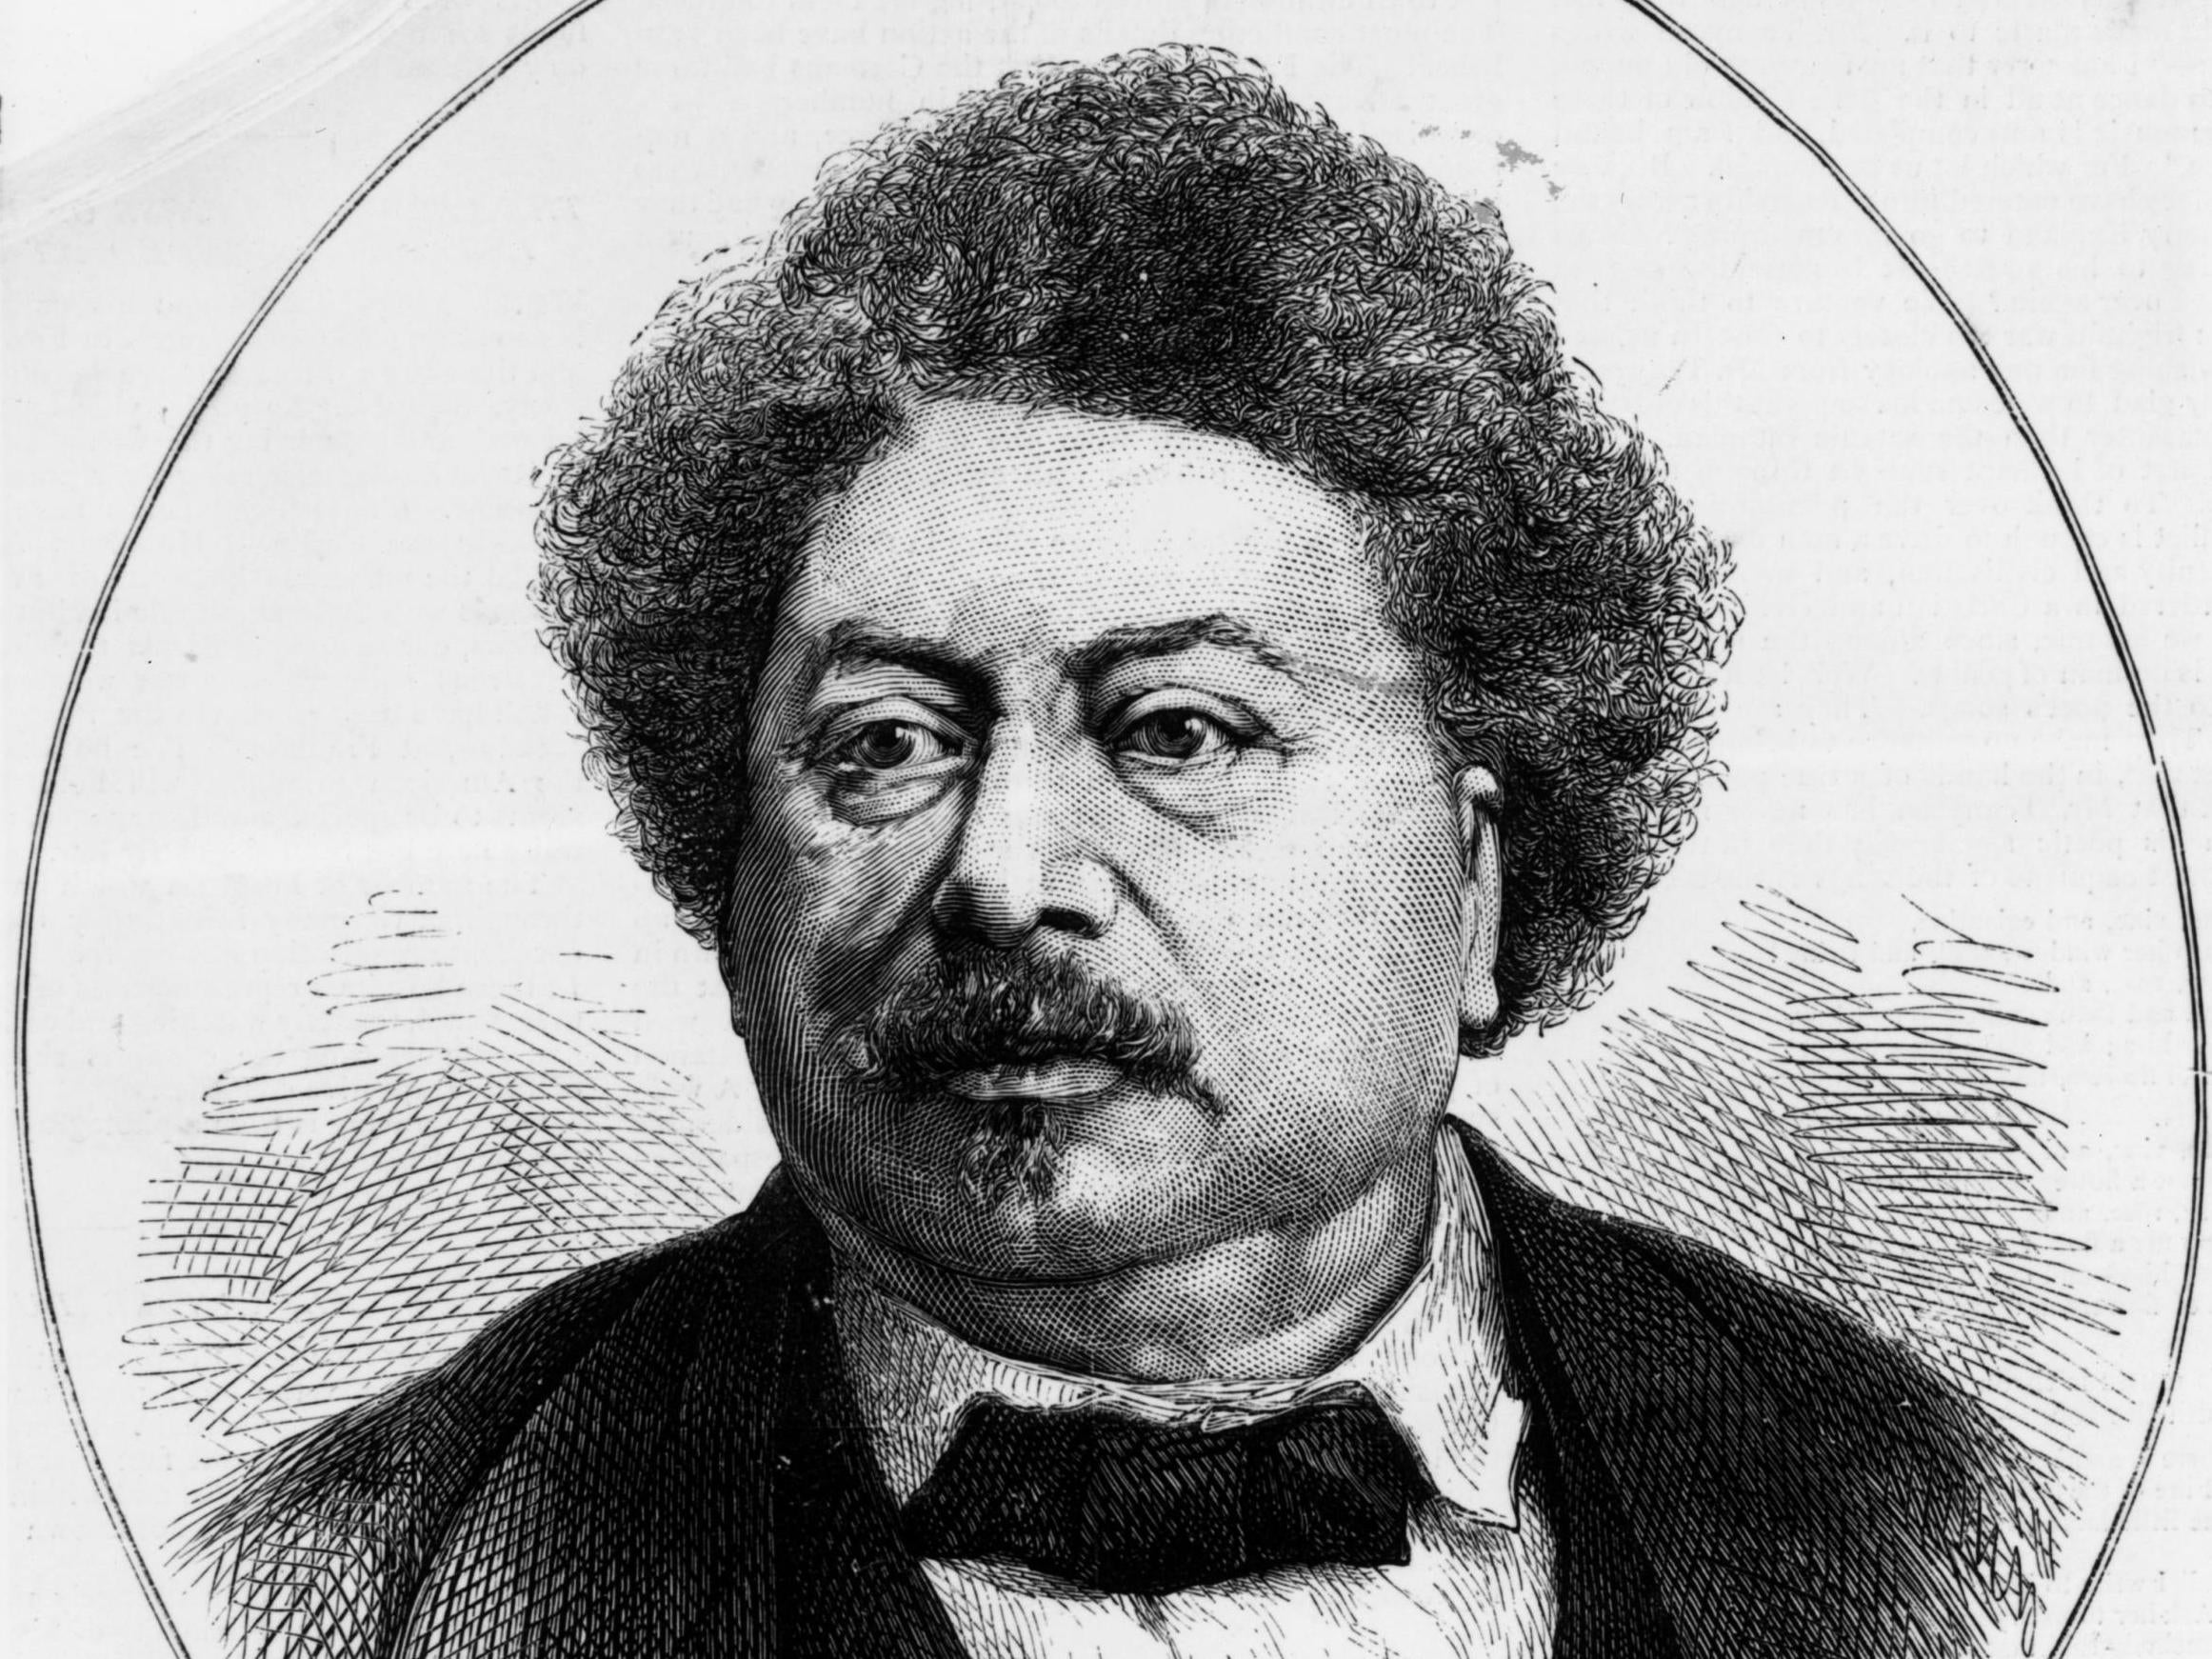 A sketch portrait of French author Alexandre Dumas (pere), known for 'The Three Muskateers'